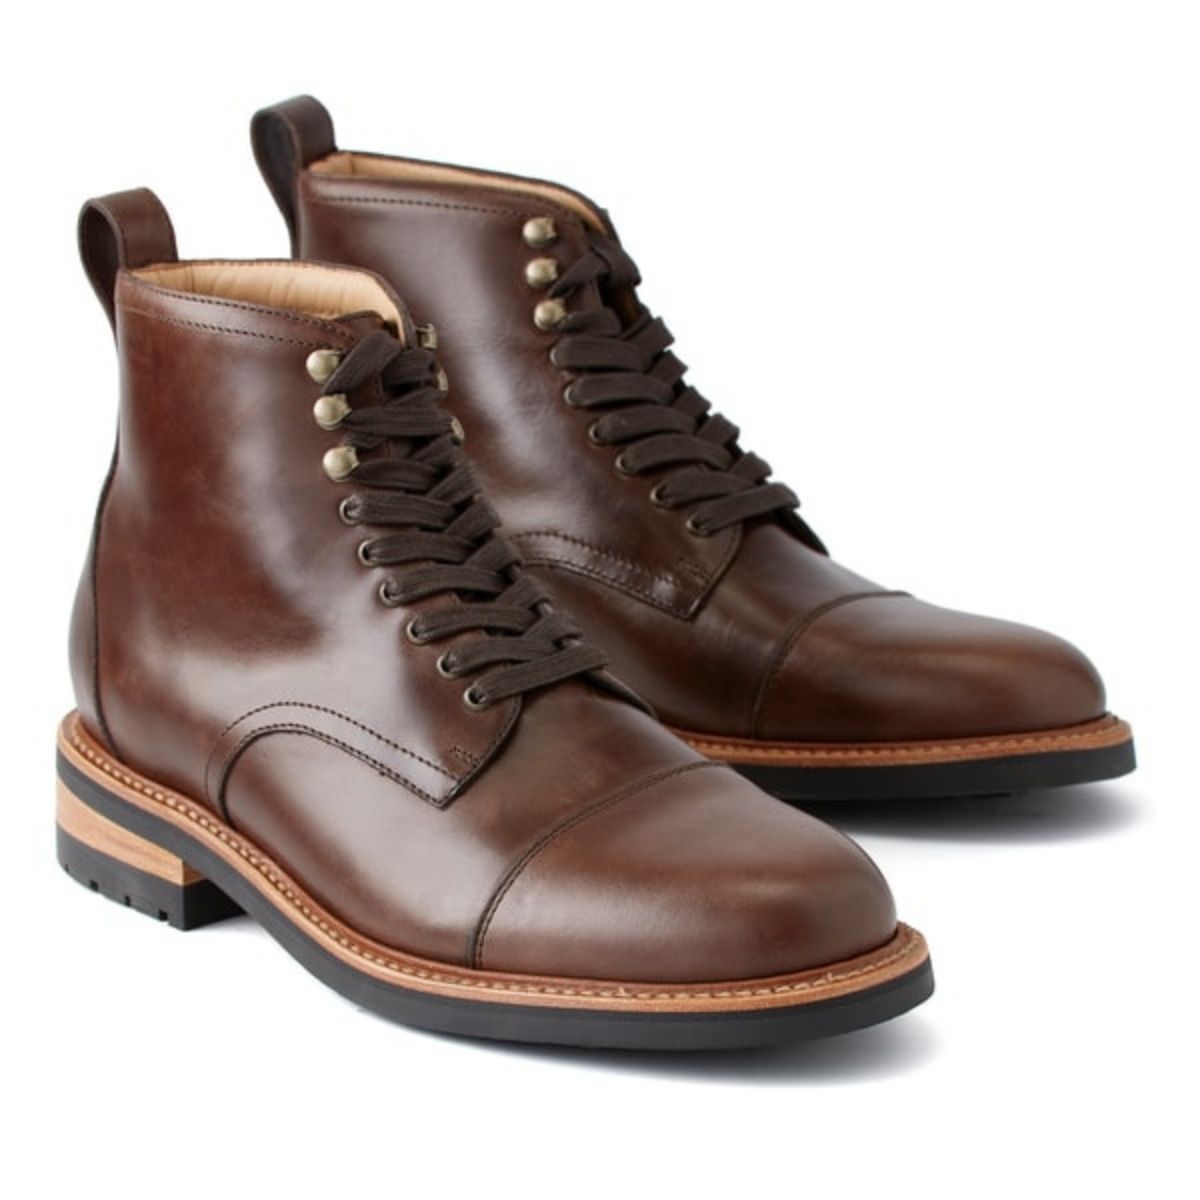 Get These Rhodes Darren Boots For Nearly 50% Off Right Now - BroBible